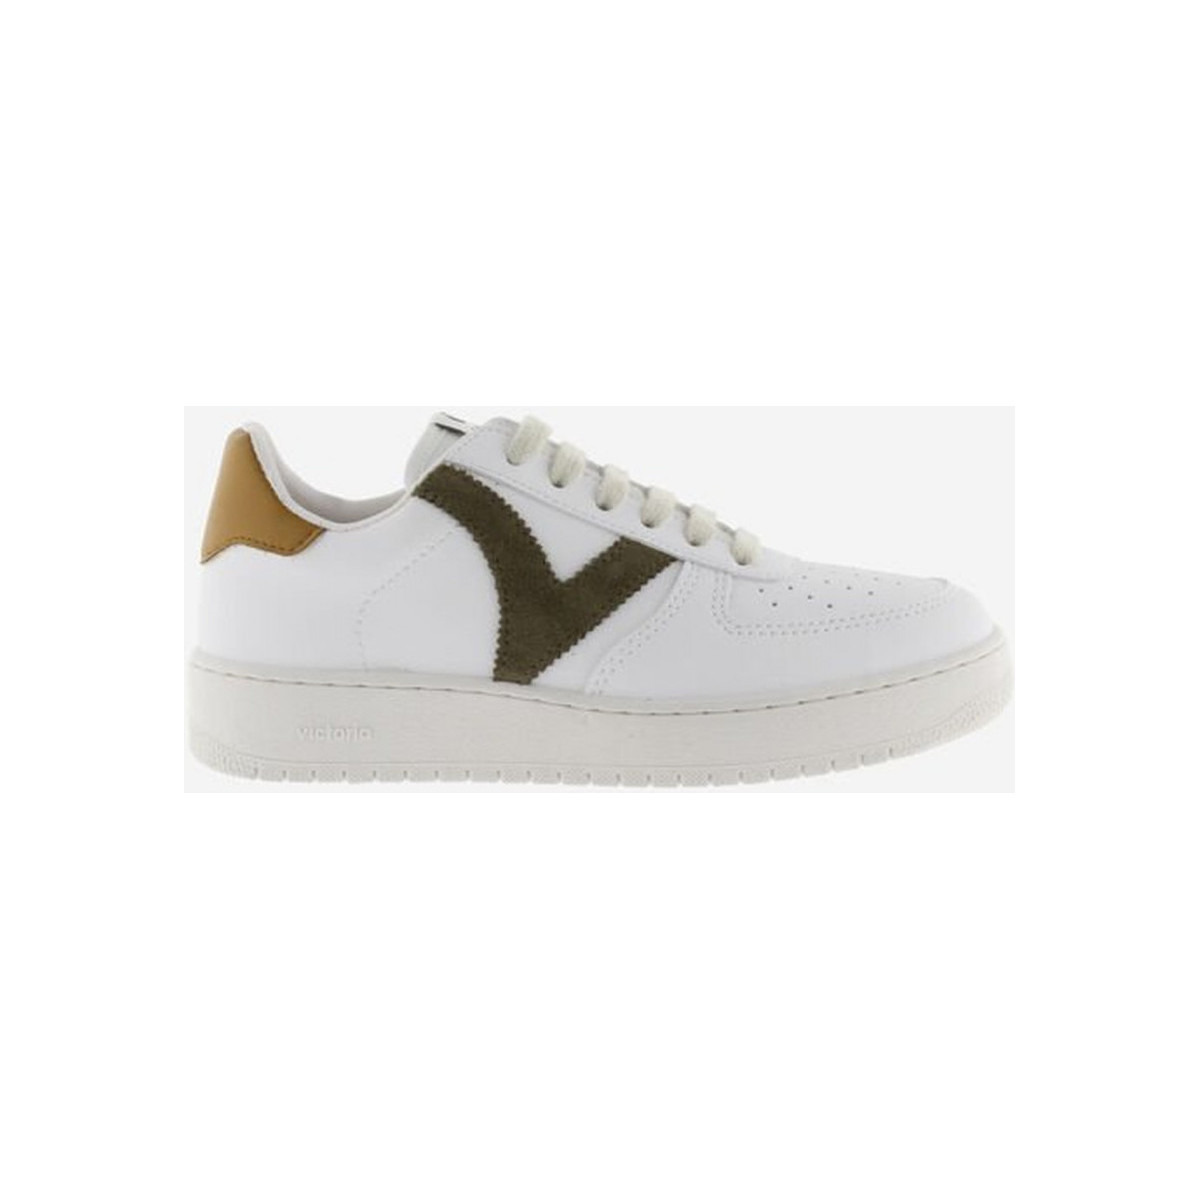 Victoria - Woman White Sneakers from Spartoo GOOFASH